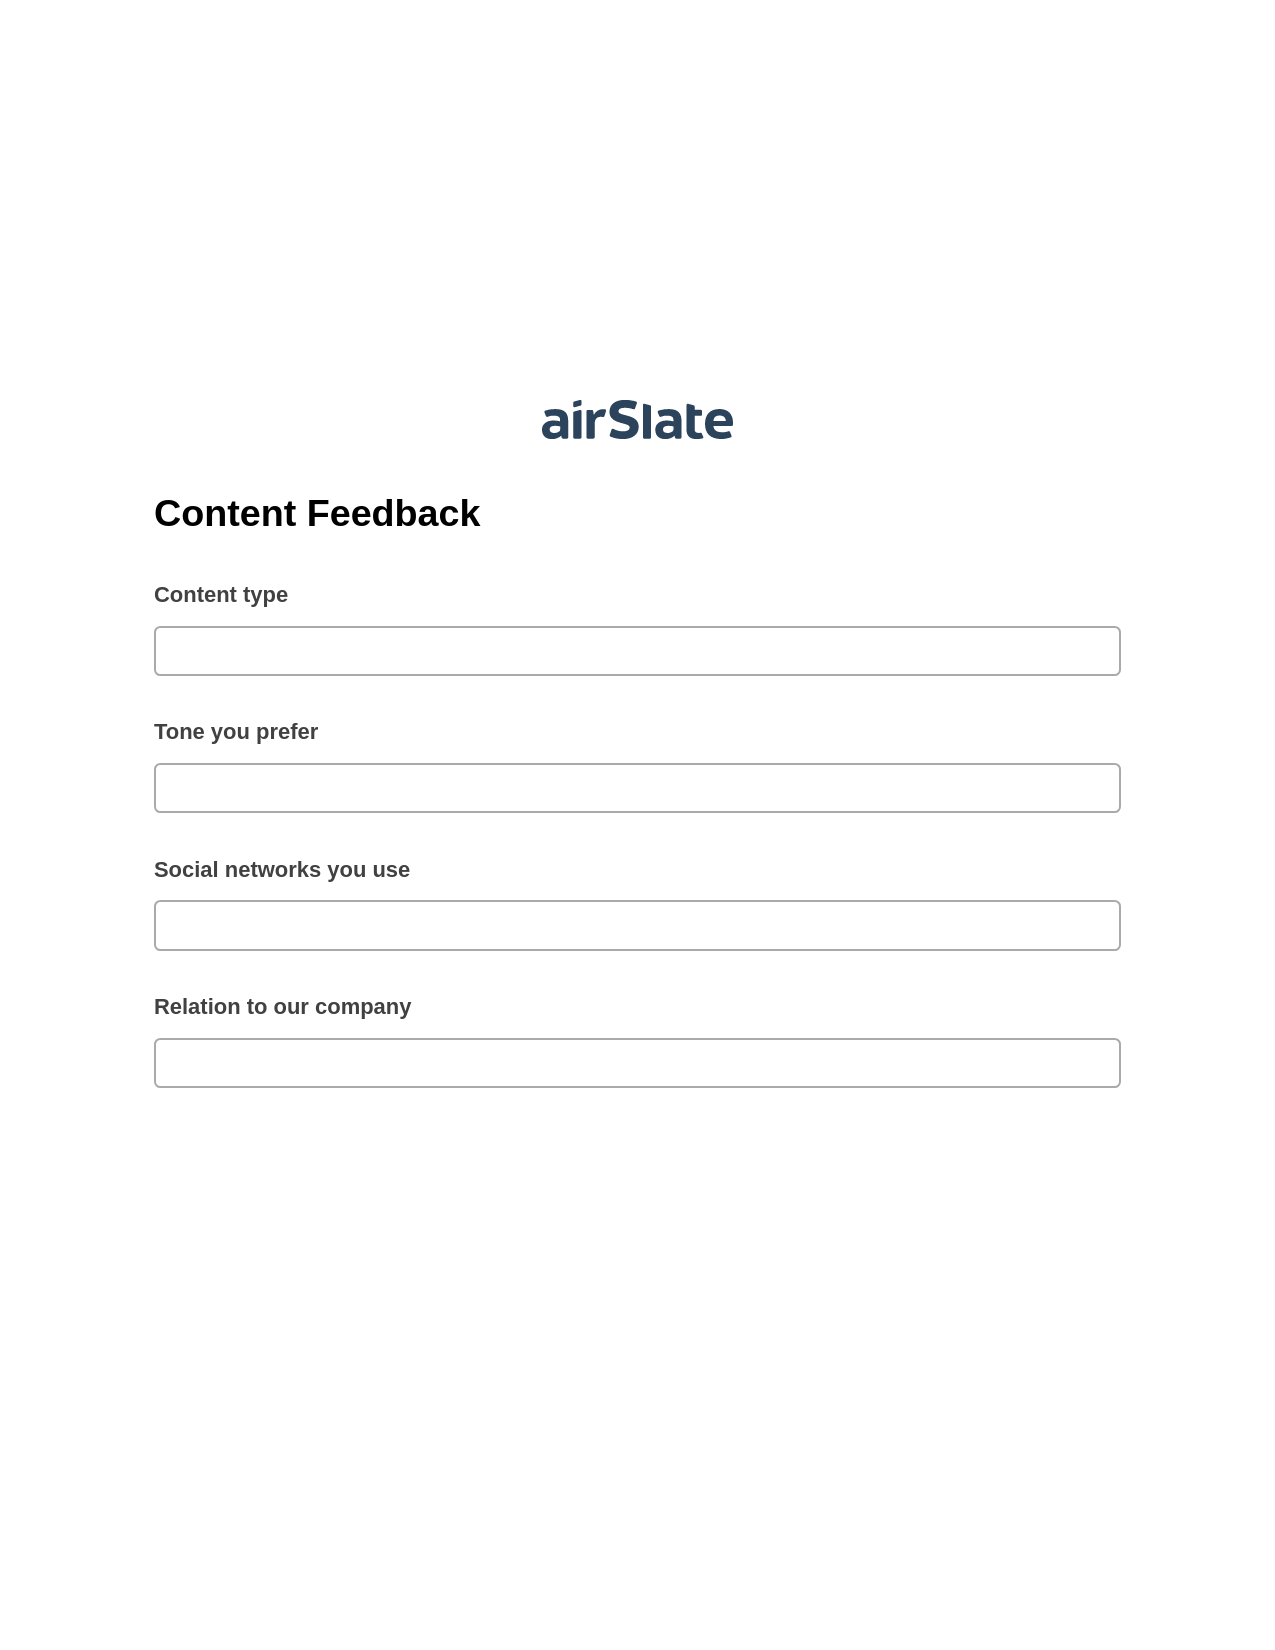 Content Feedback Pre-fill from MySQL Bot, Lock the slate bot, Export to Smartsheet